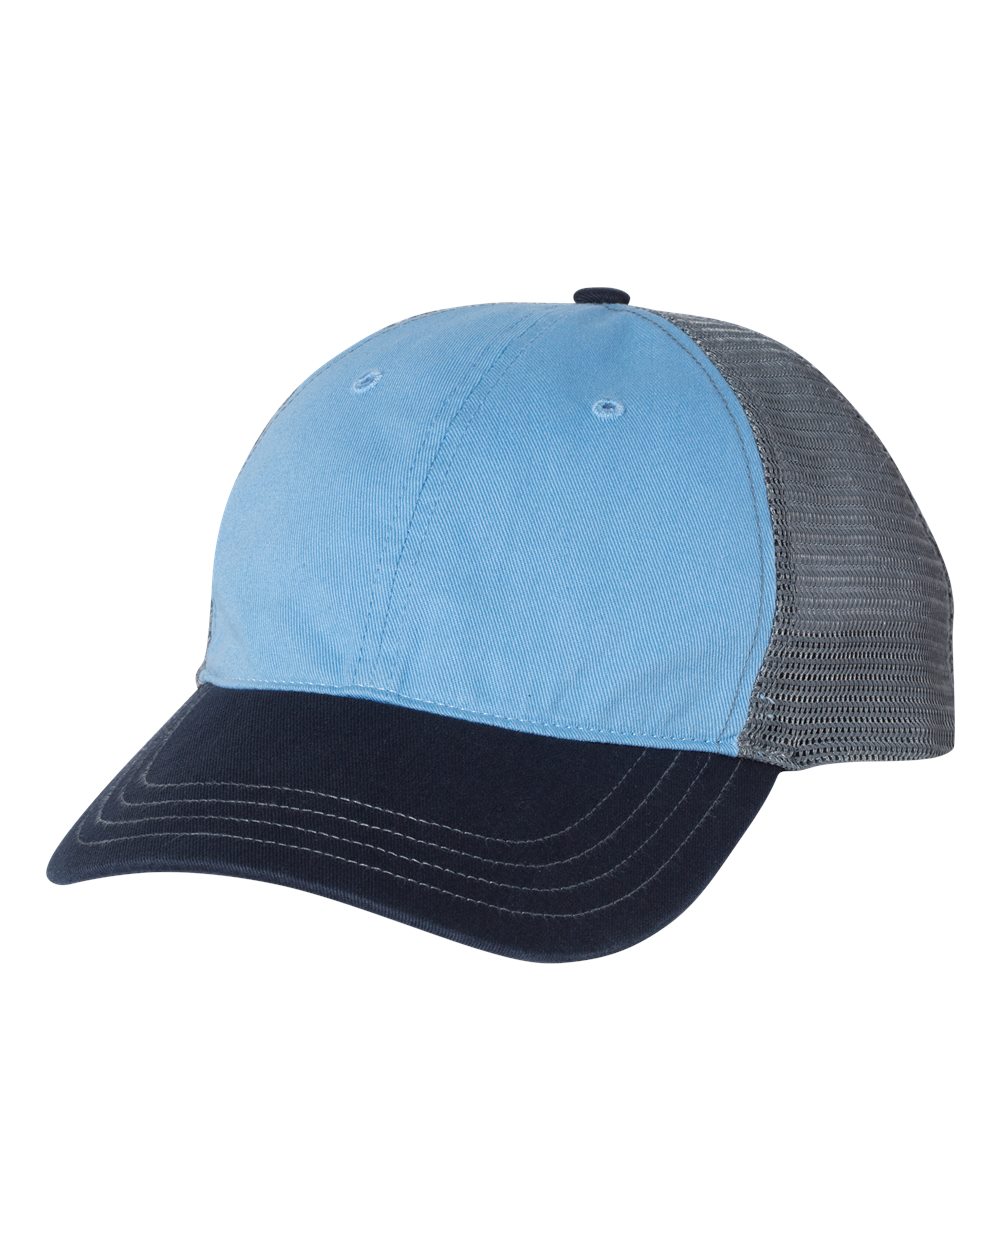 click to view Columbia Blue/Charcoal/Navy